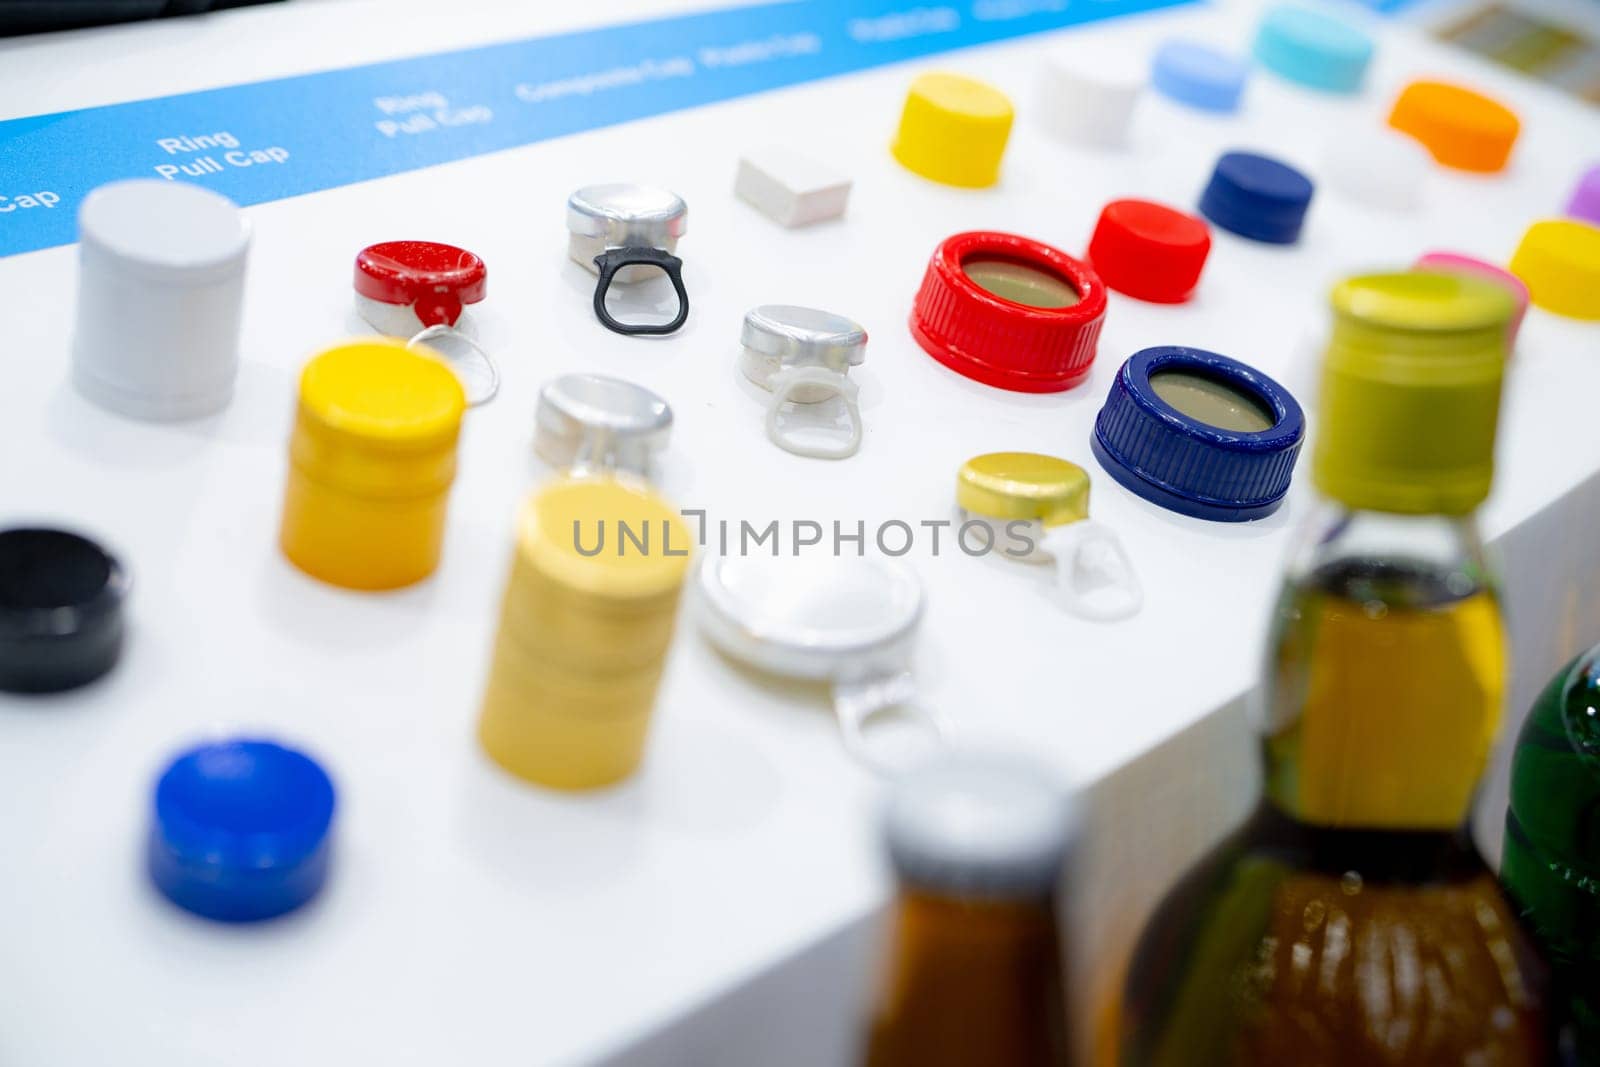 Caps packaging concept. Bottle caps and closures packaging design. Screw caps. Ring pull cap and composite cap. Various cap products. Bottle caps for alcohol drink, beer, water, and retort products.